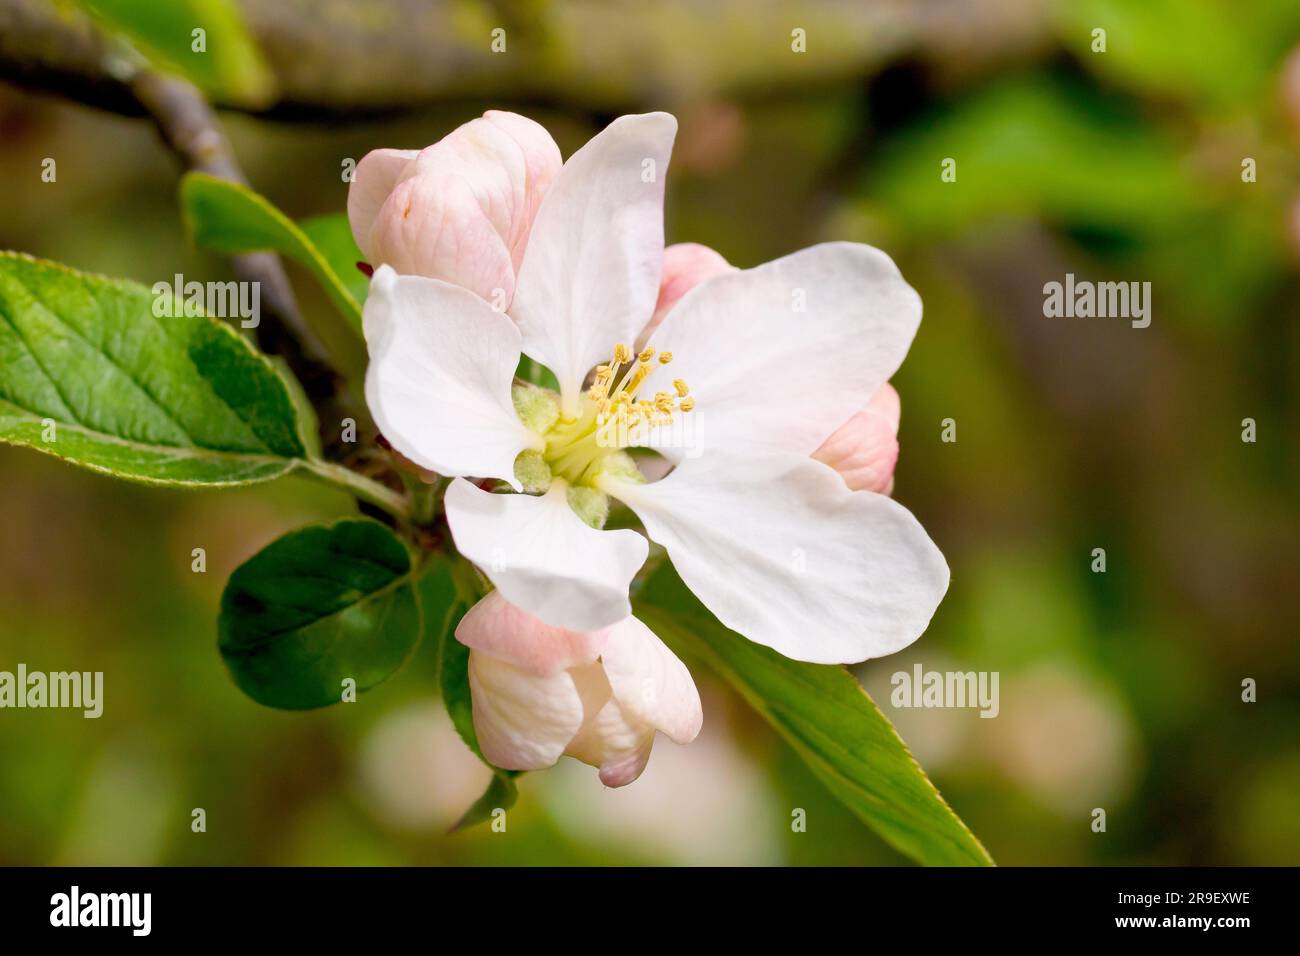 Crab Apple (malus sylvestris), close up of a single flower or blossom appearing on the common tree in the spring. Stock Photo